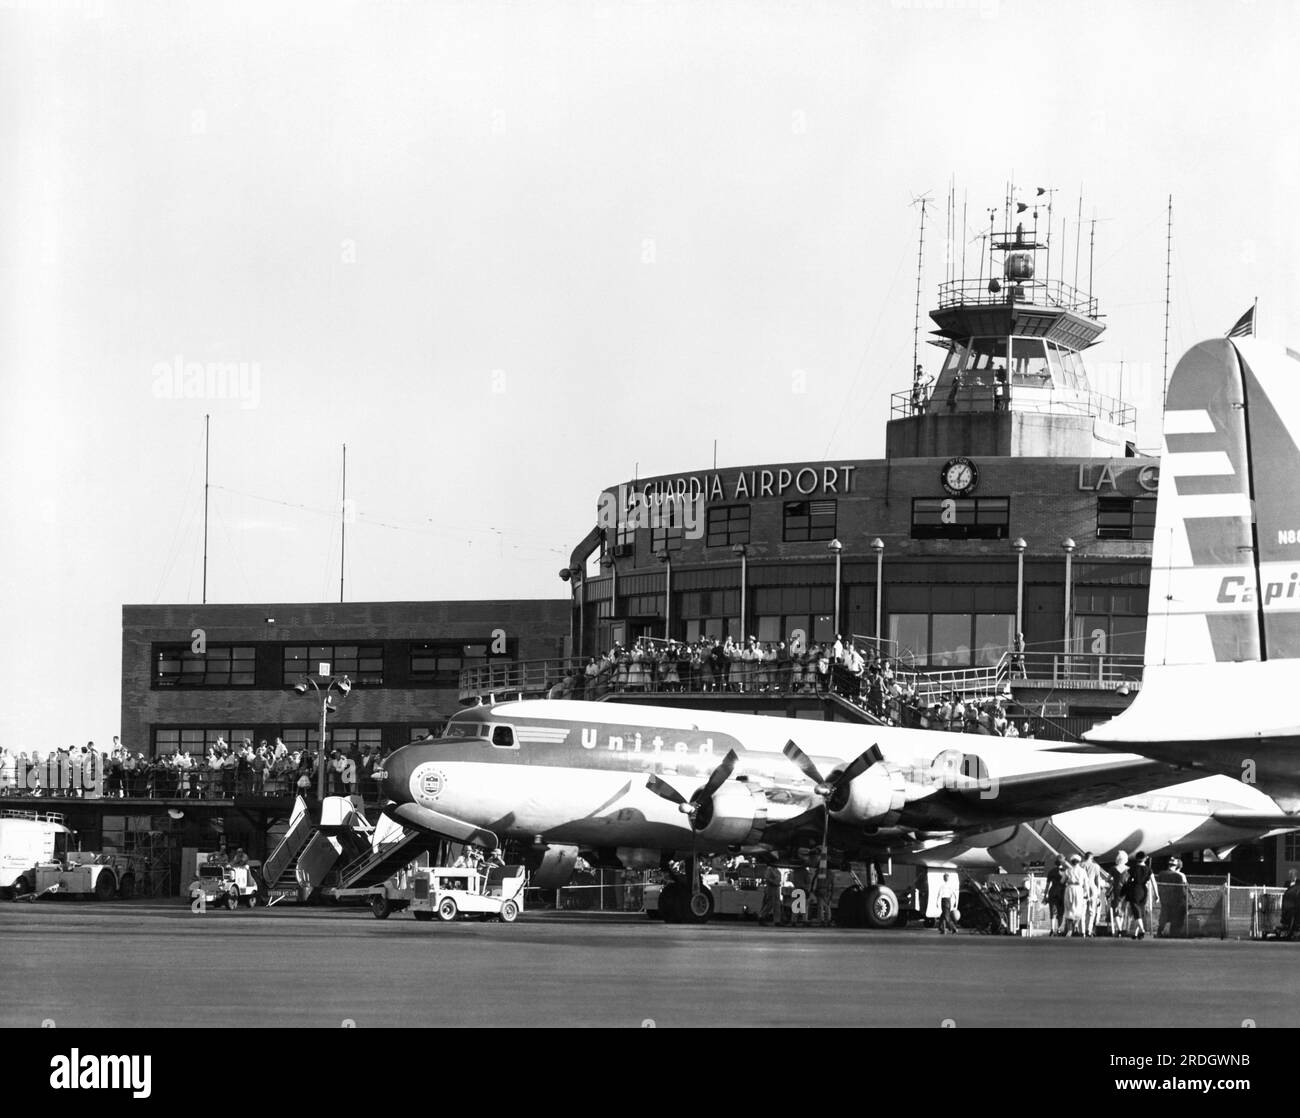 New York, New York:   August 23, 1955 The United Airlines DC-6 'Mainliner Ohio' passenger plane on the tarmac at LaGuardia Airport in Queens. Stock Photo